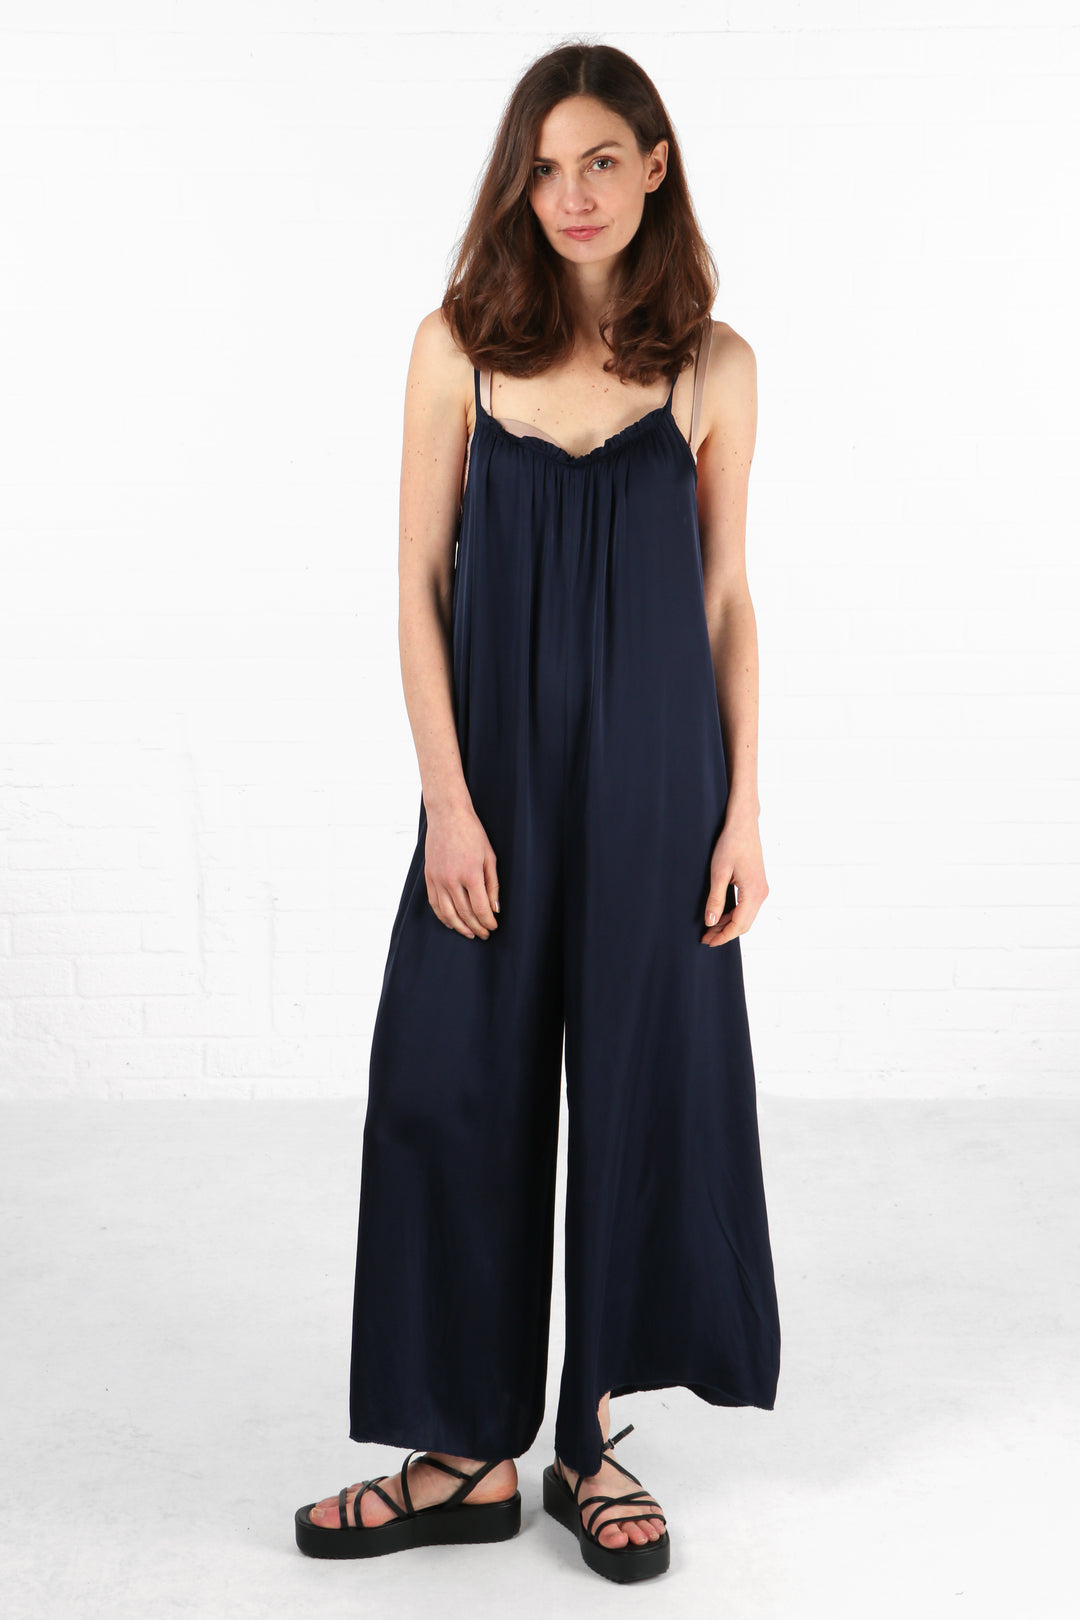 model wearing a navy blue faux silk wideleg jumpsuit with thin spaghetti straps and a v neck